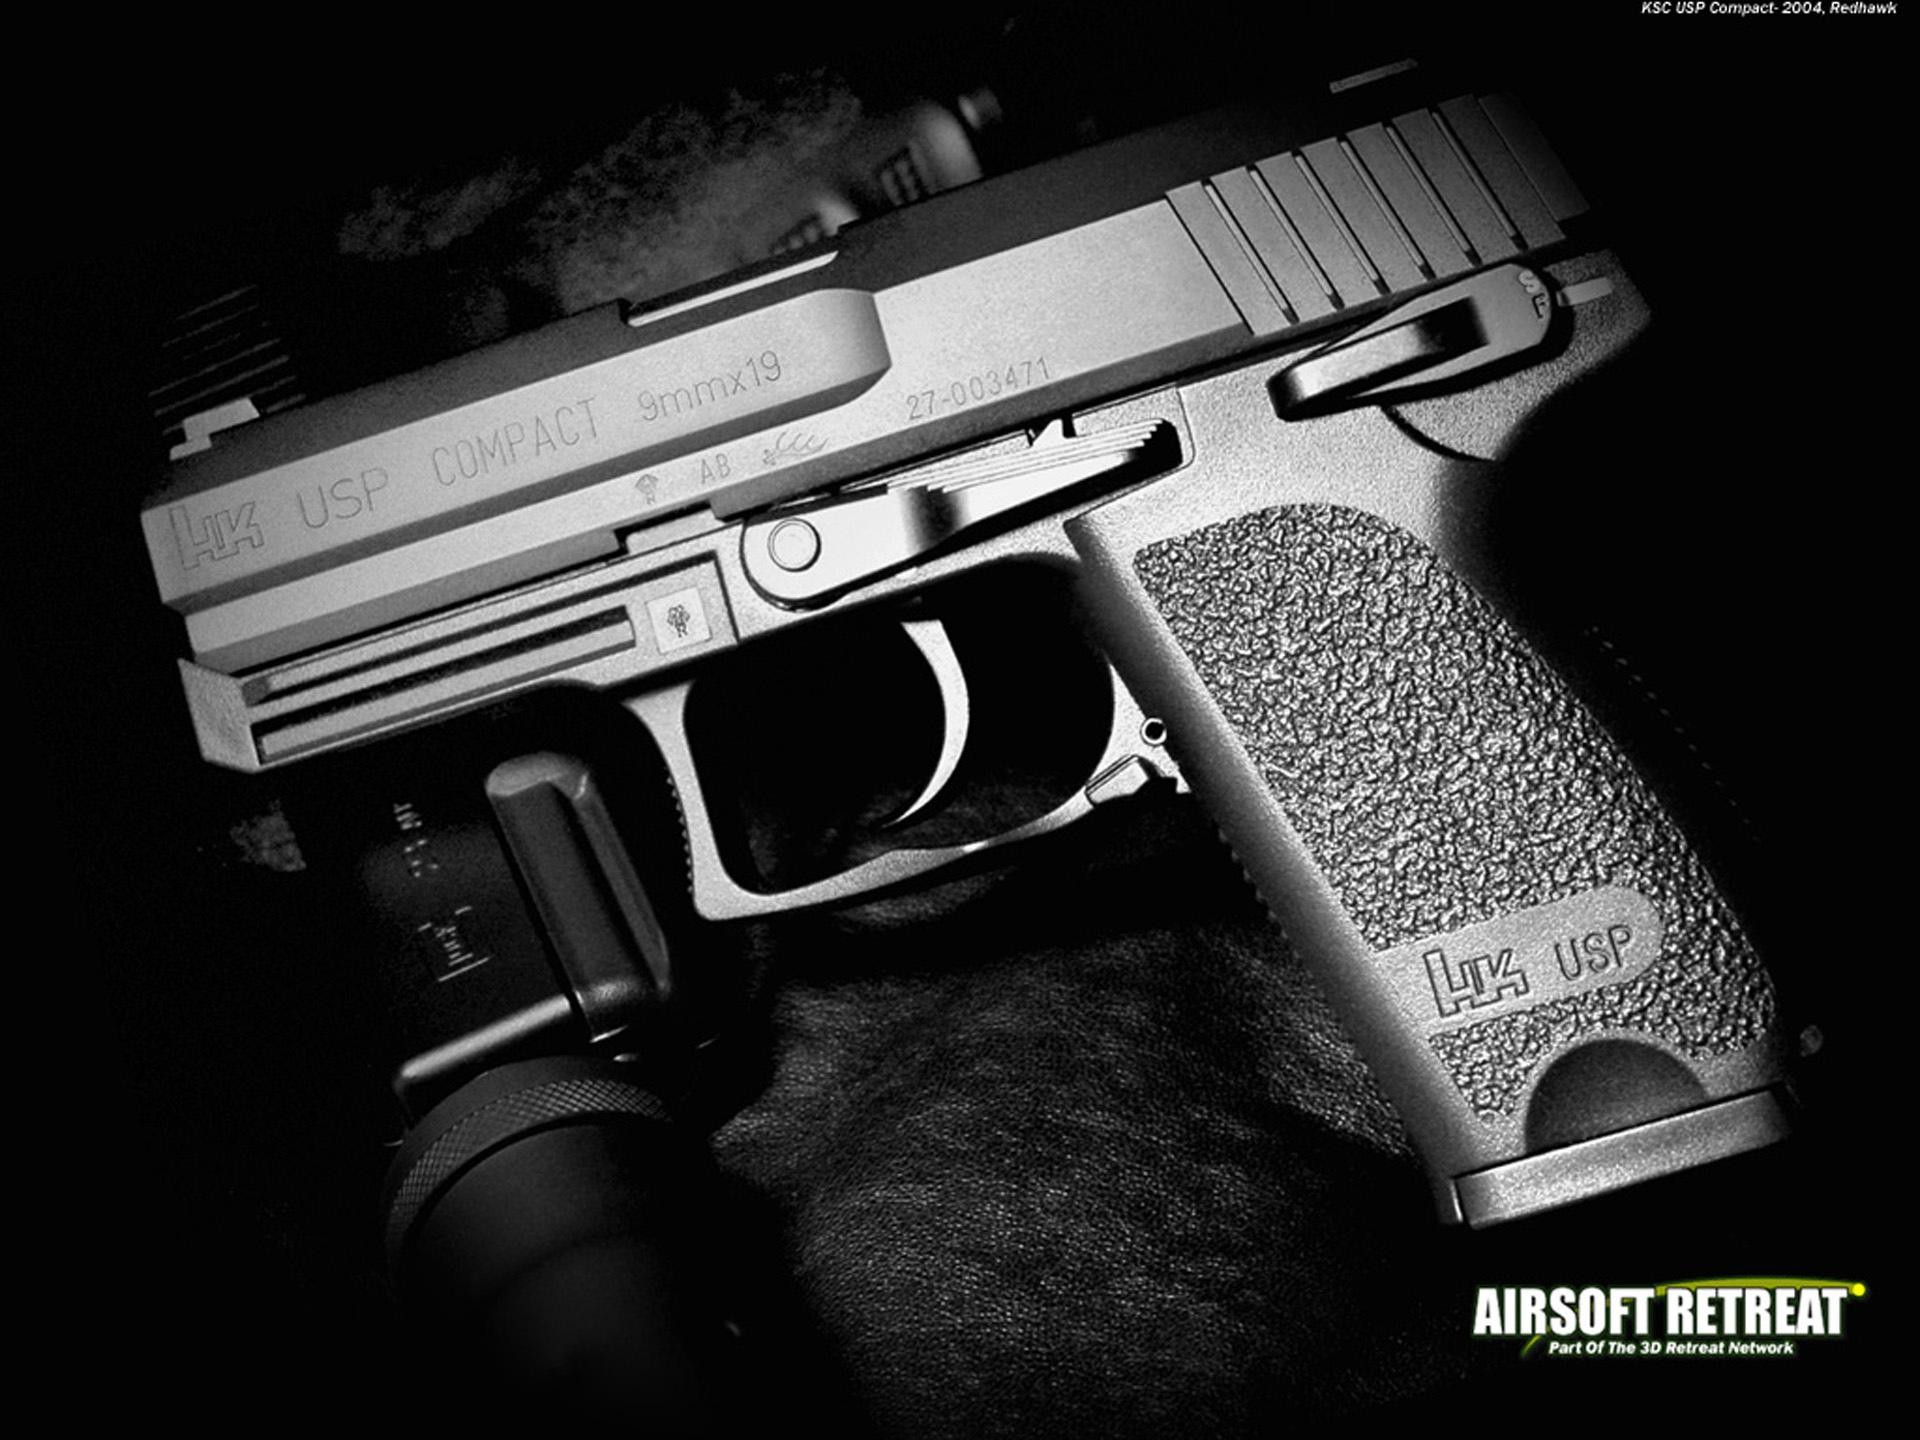 1920x1440 Airsoft Pistol wallpapers for iphone